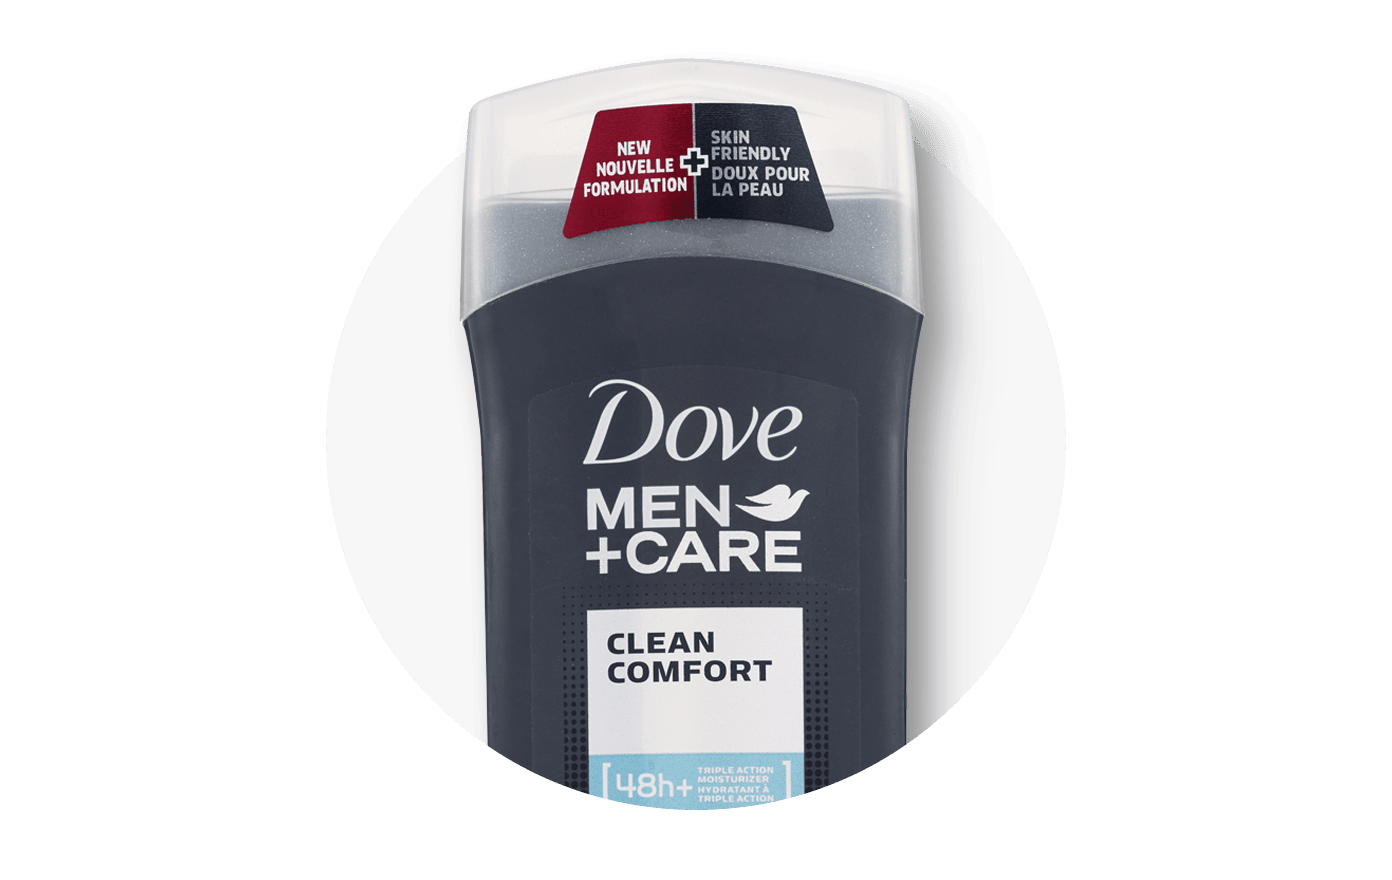 Deodorant, showing Dove product